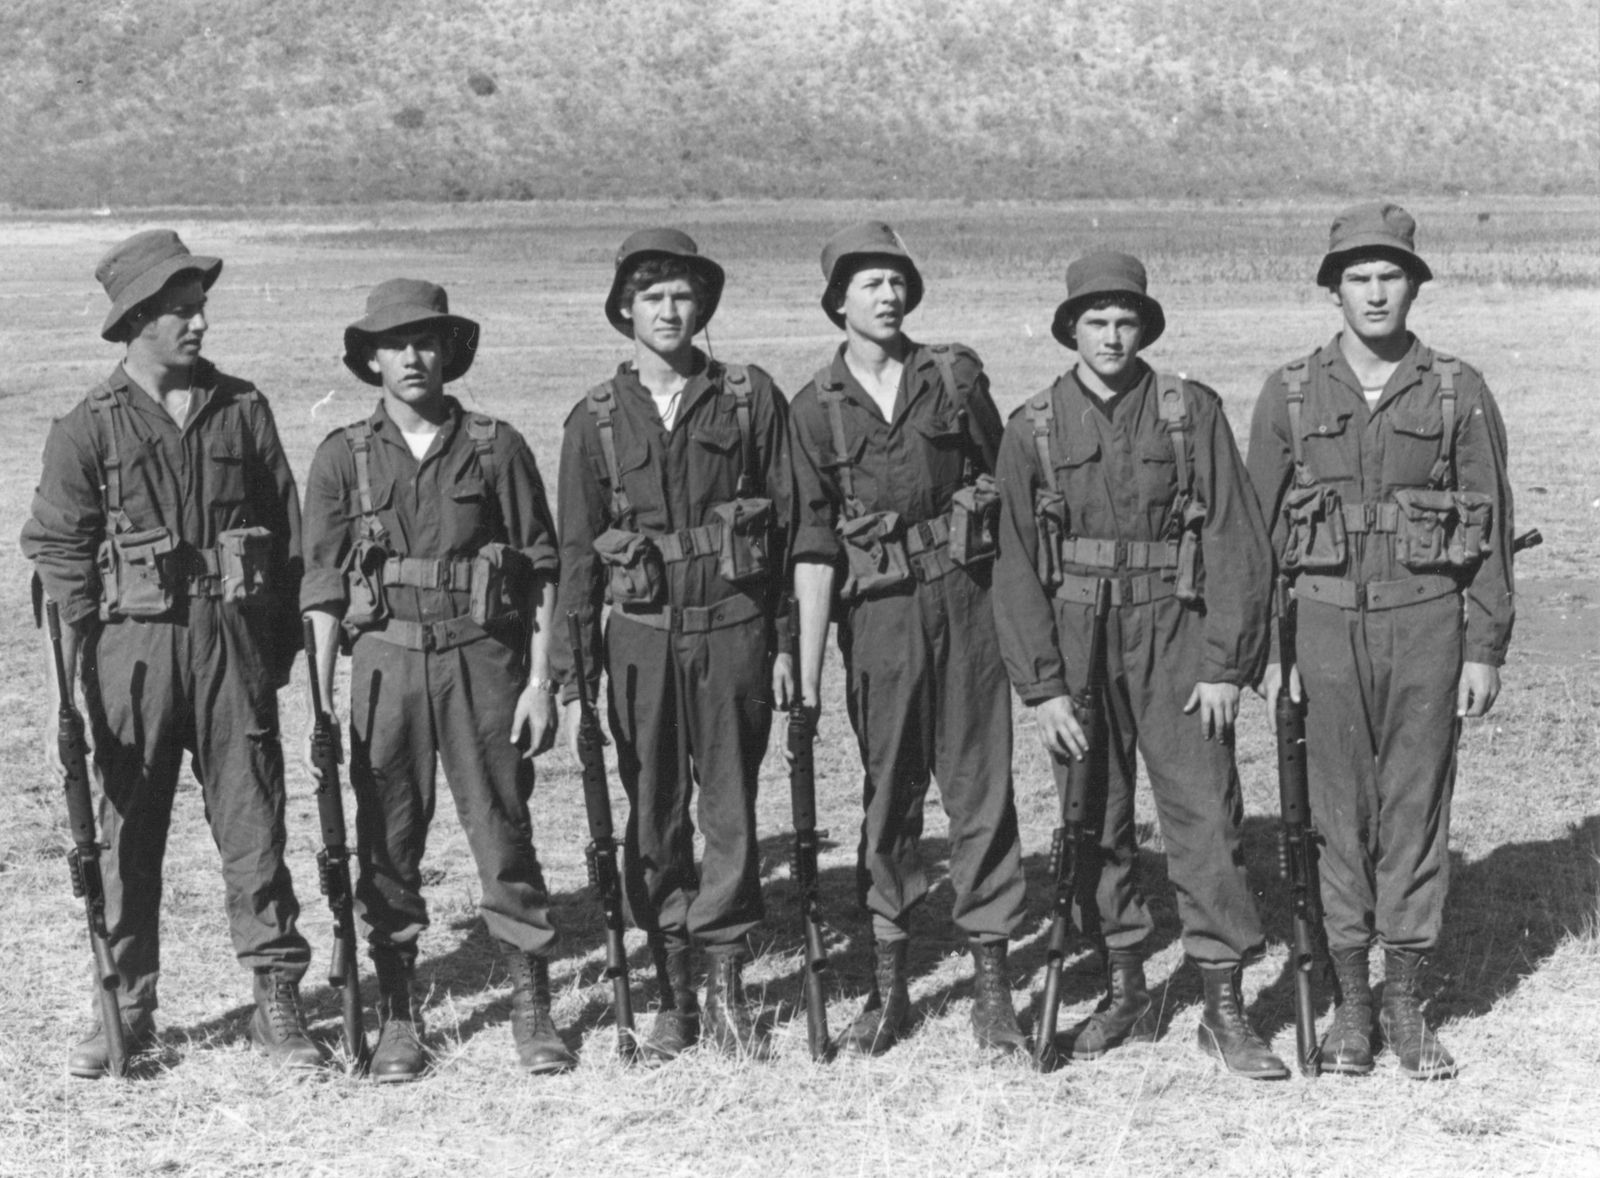 © Jansen van Staden - Pa, third from the right, with his R1 rifle, and fellow conscripts, during basic training, 1978